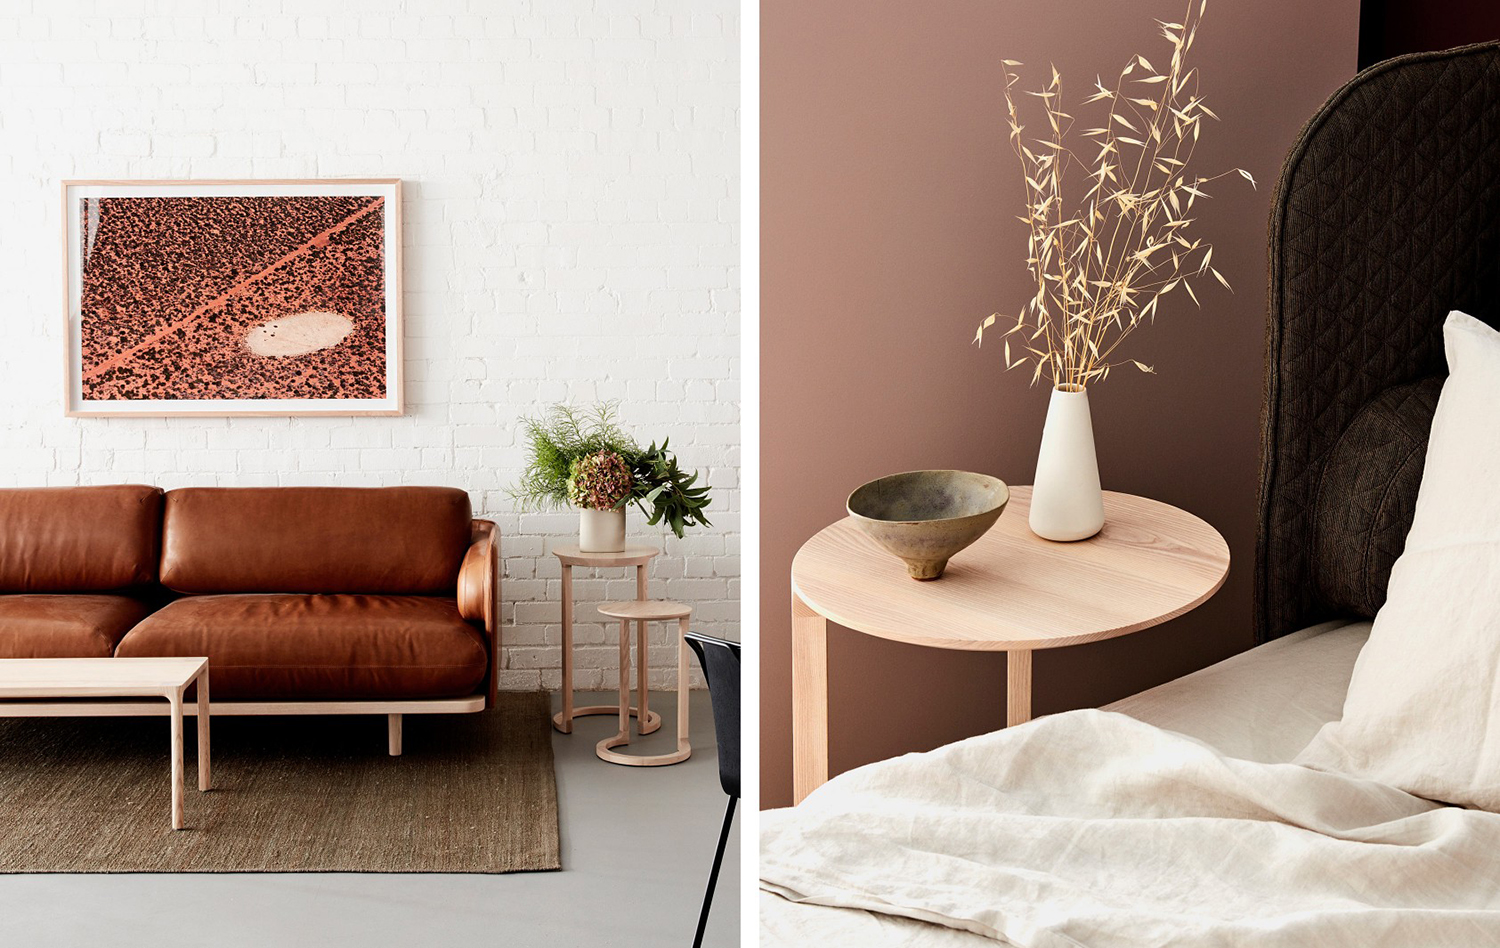 Art direction by Design by Toko for Cult's new contemporary furniture range NAU